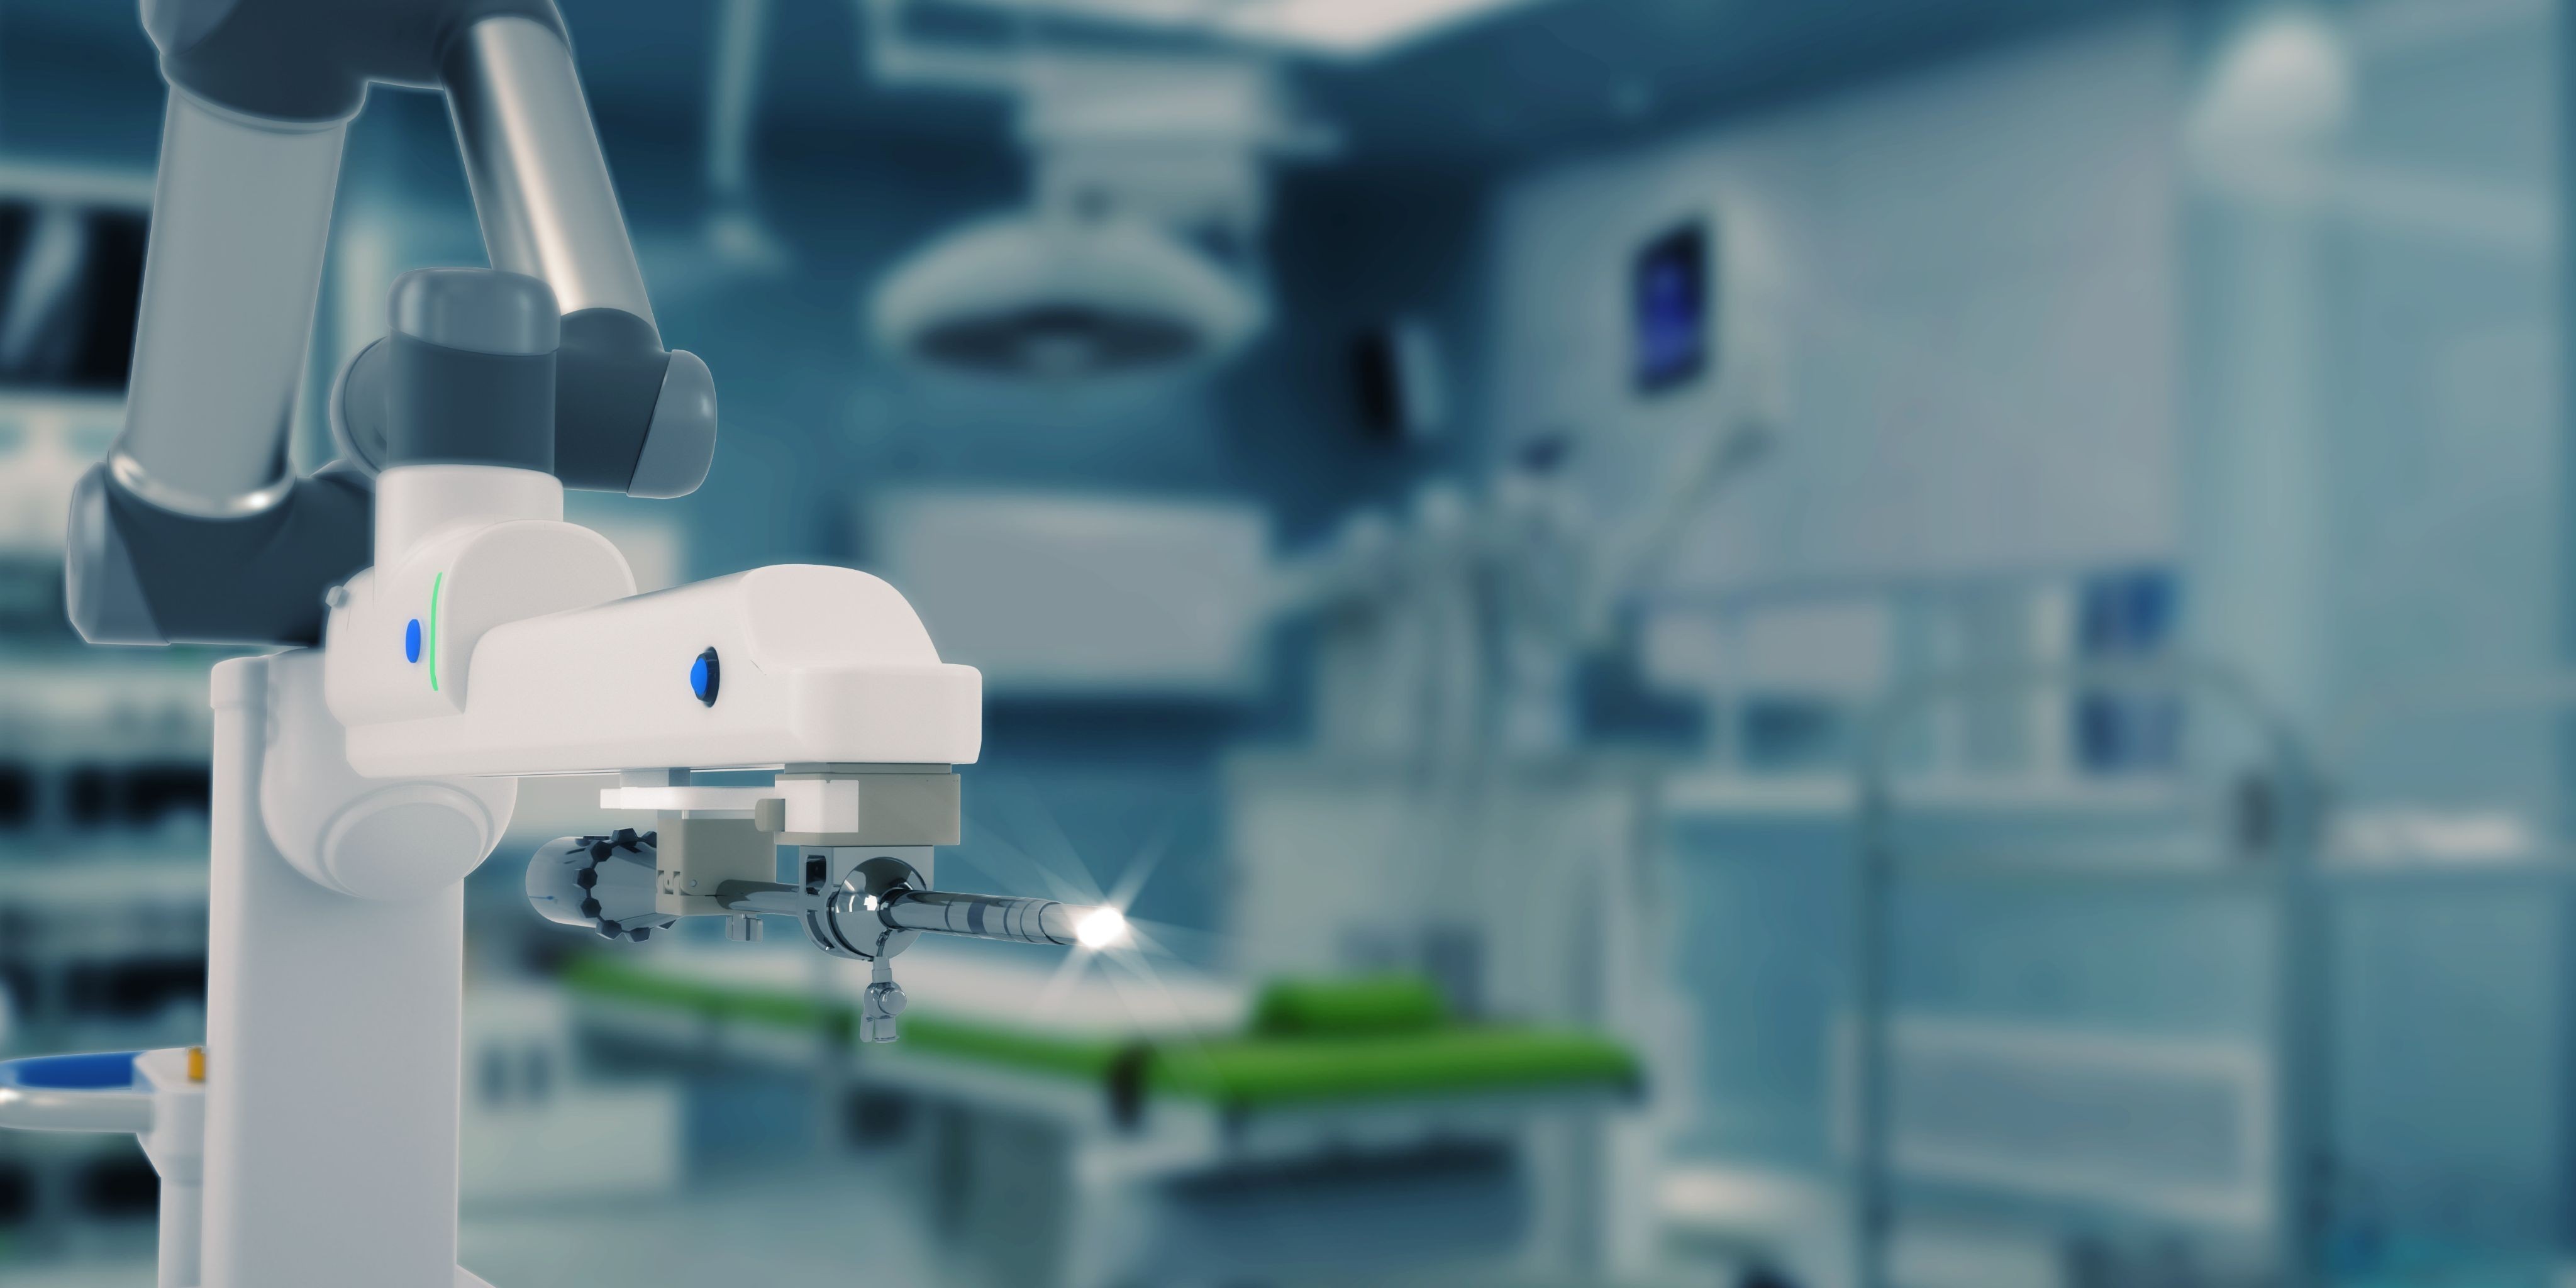 Borns Surgical Robotic System, Leading the future of minimally invasive surgery